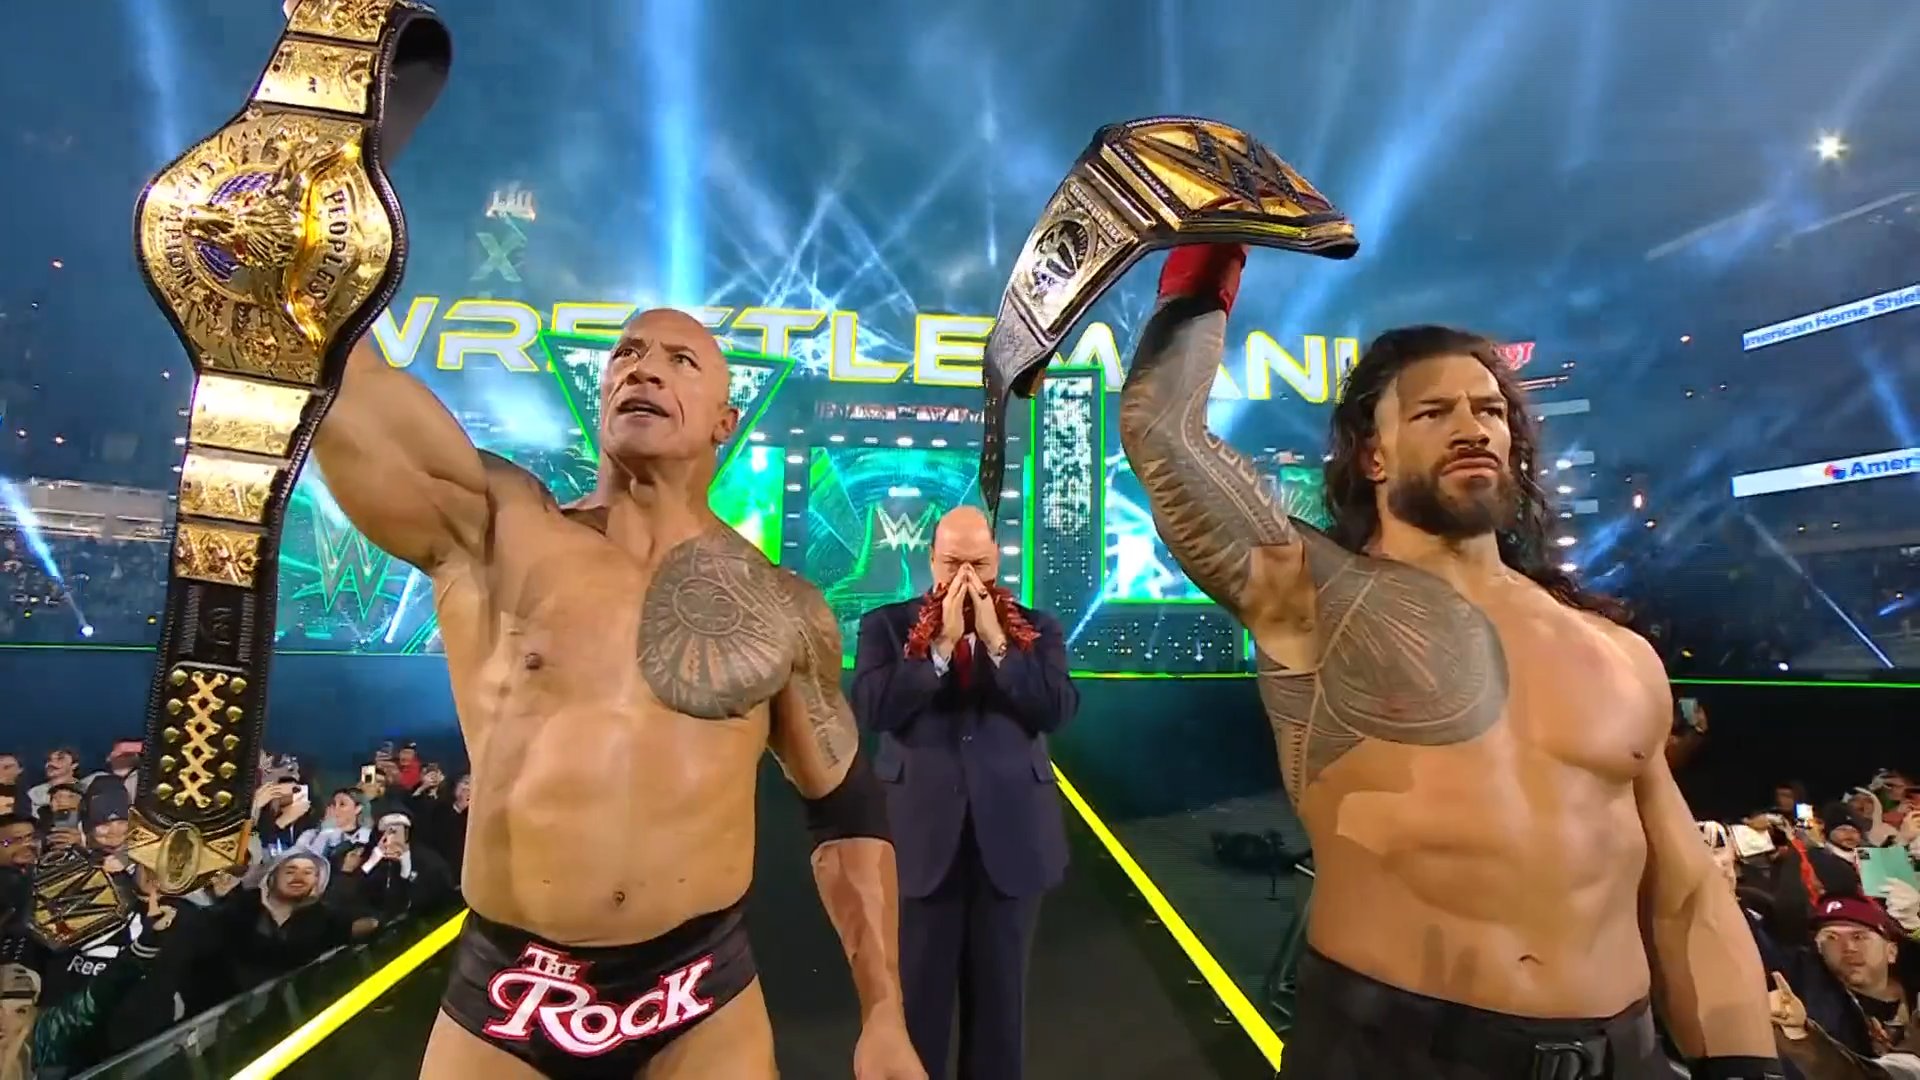 The Rock and Roman Reigns emerge victorious against Cody Rhodes and Seth Rollins in WrestleMania 40.